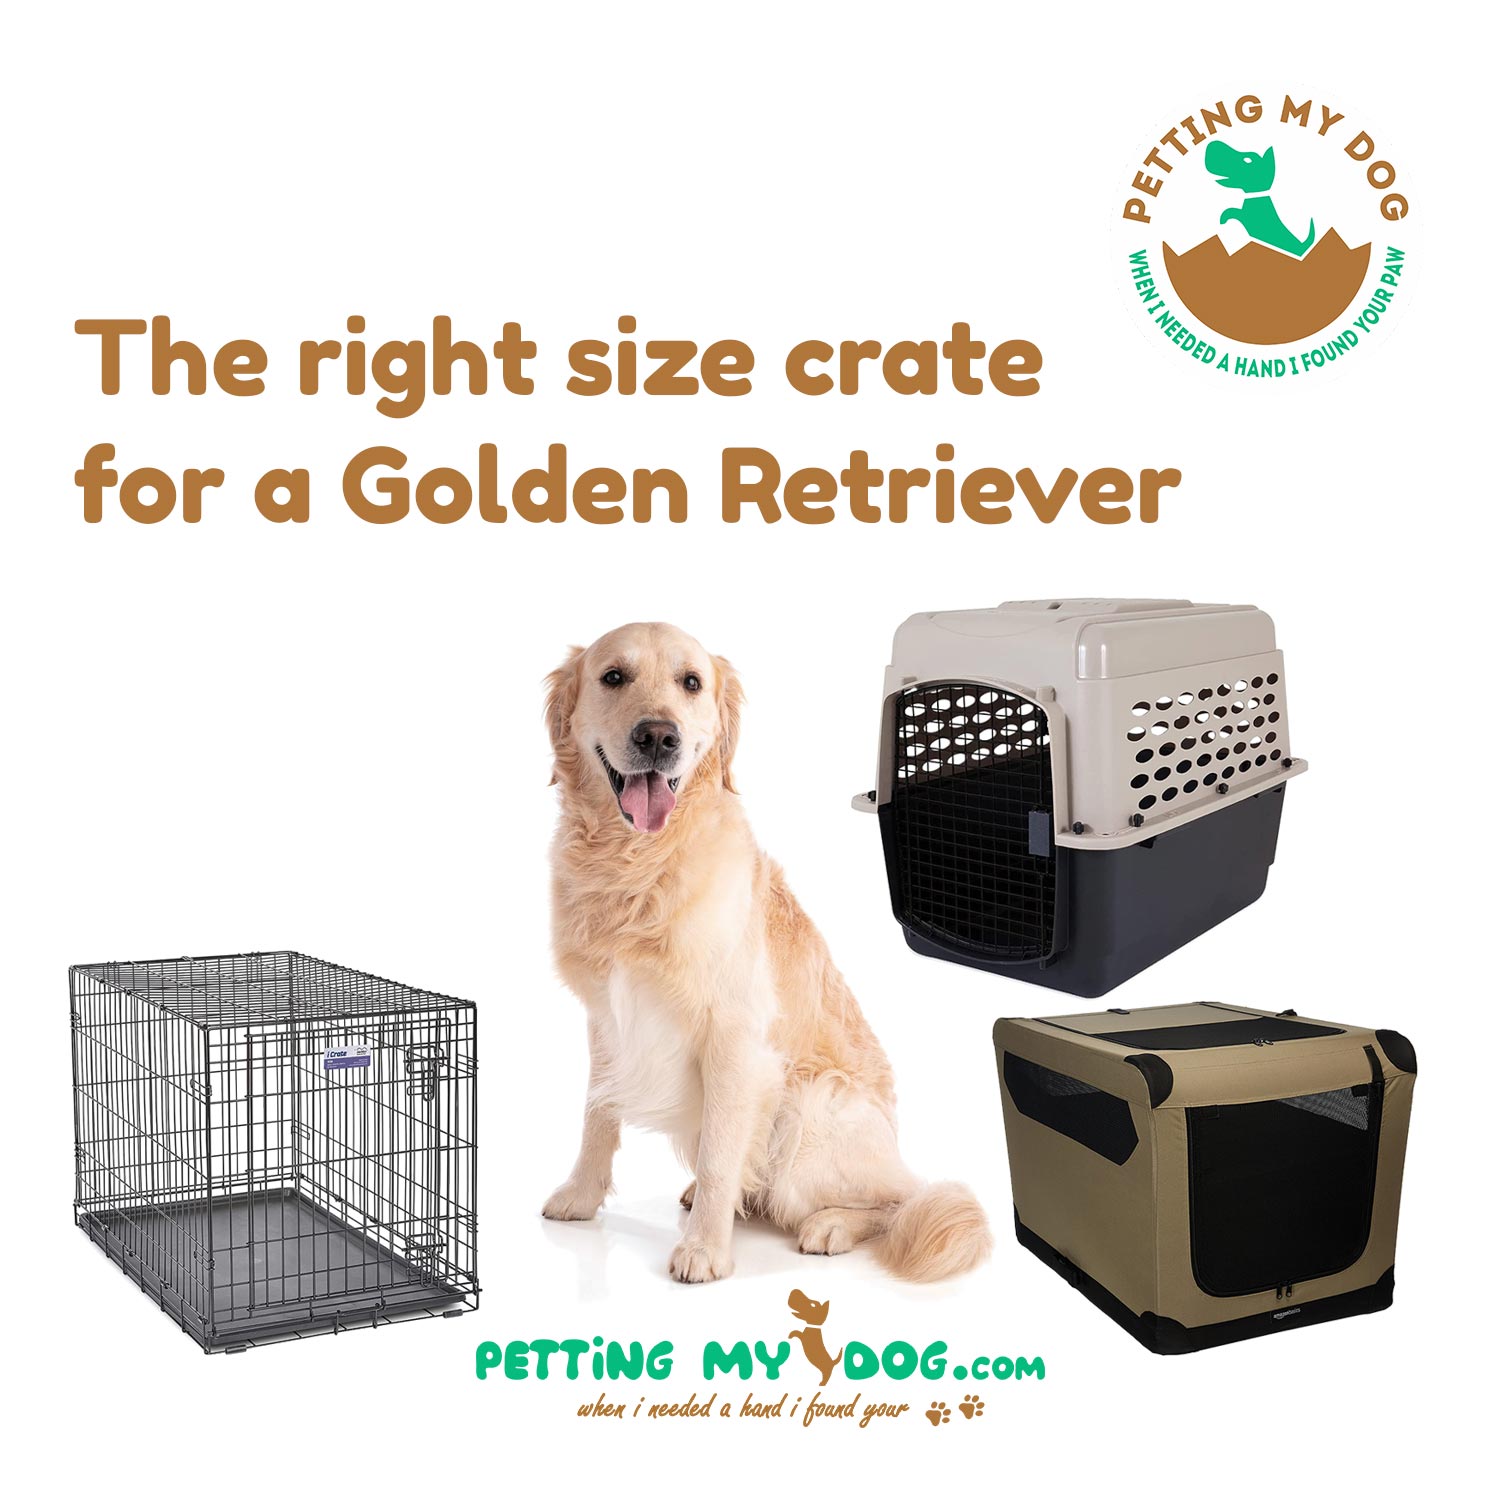 The right size crate for Golden Retriever and best one to choose